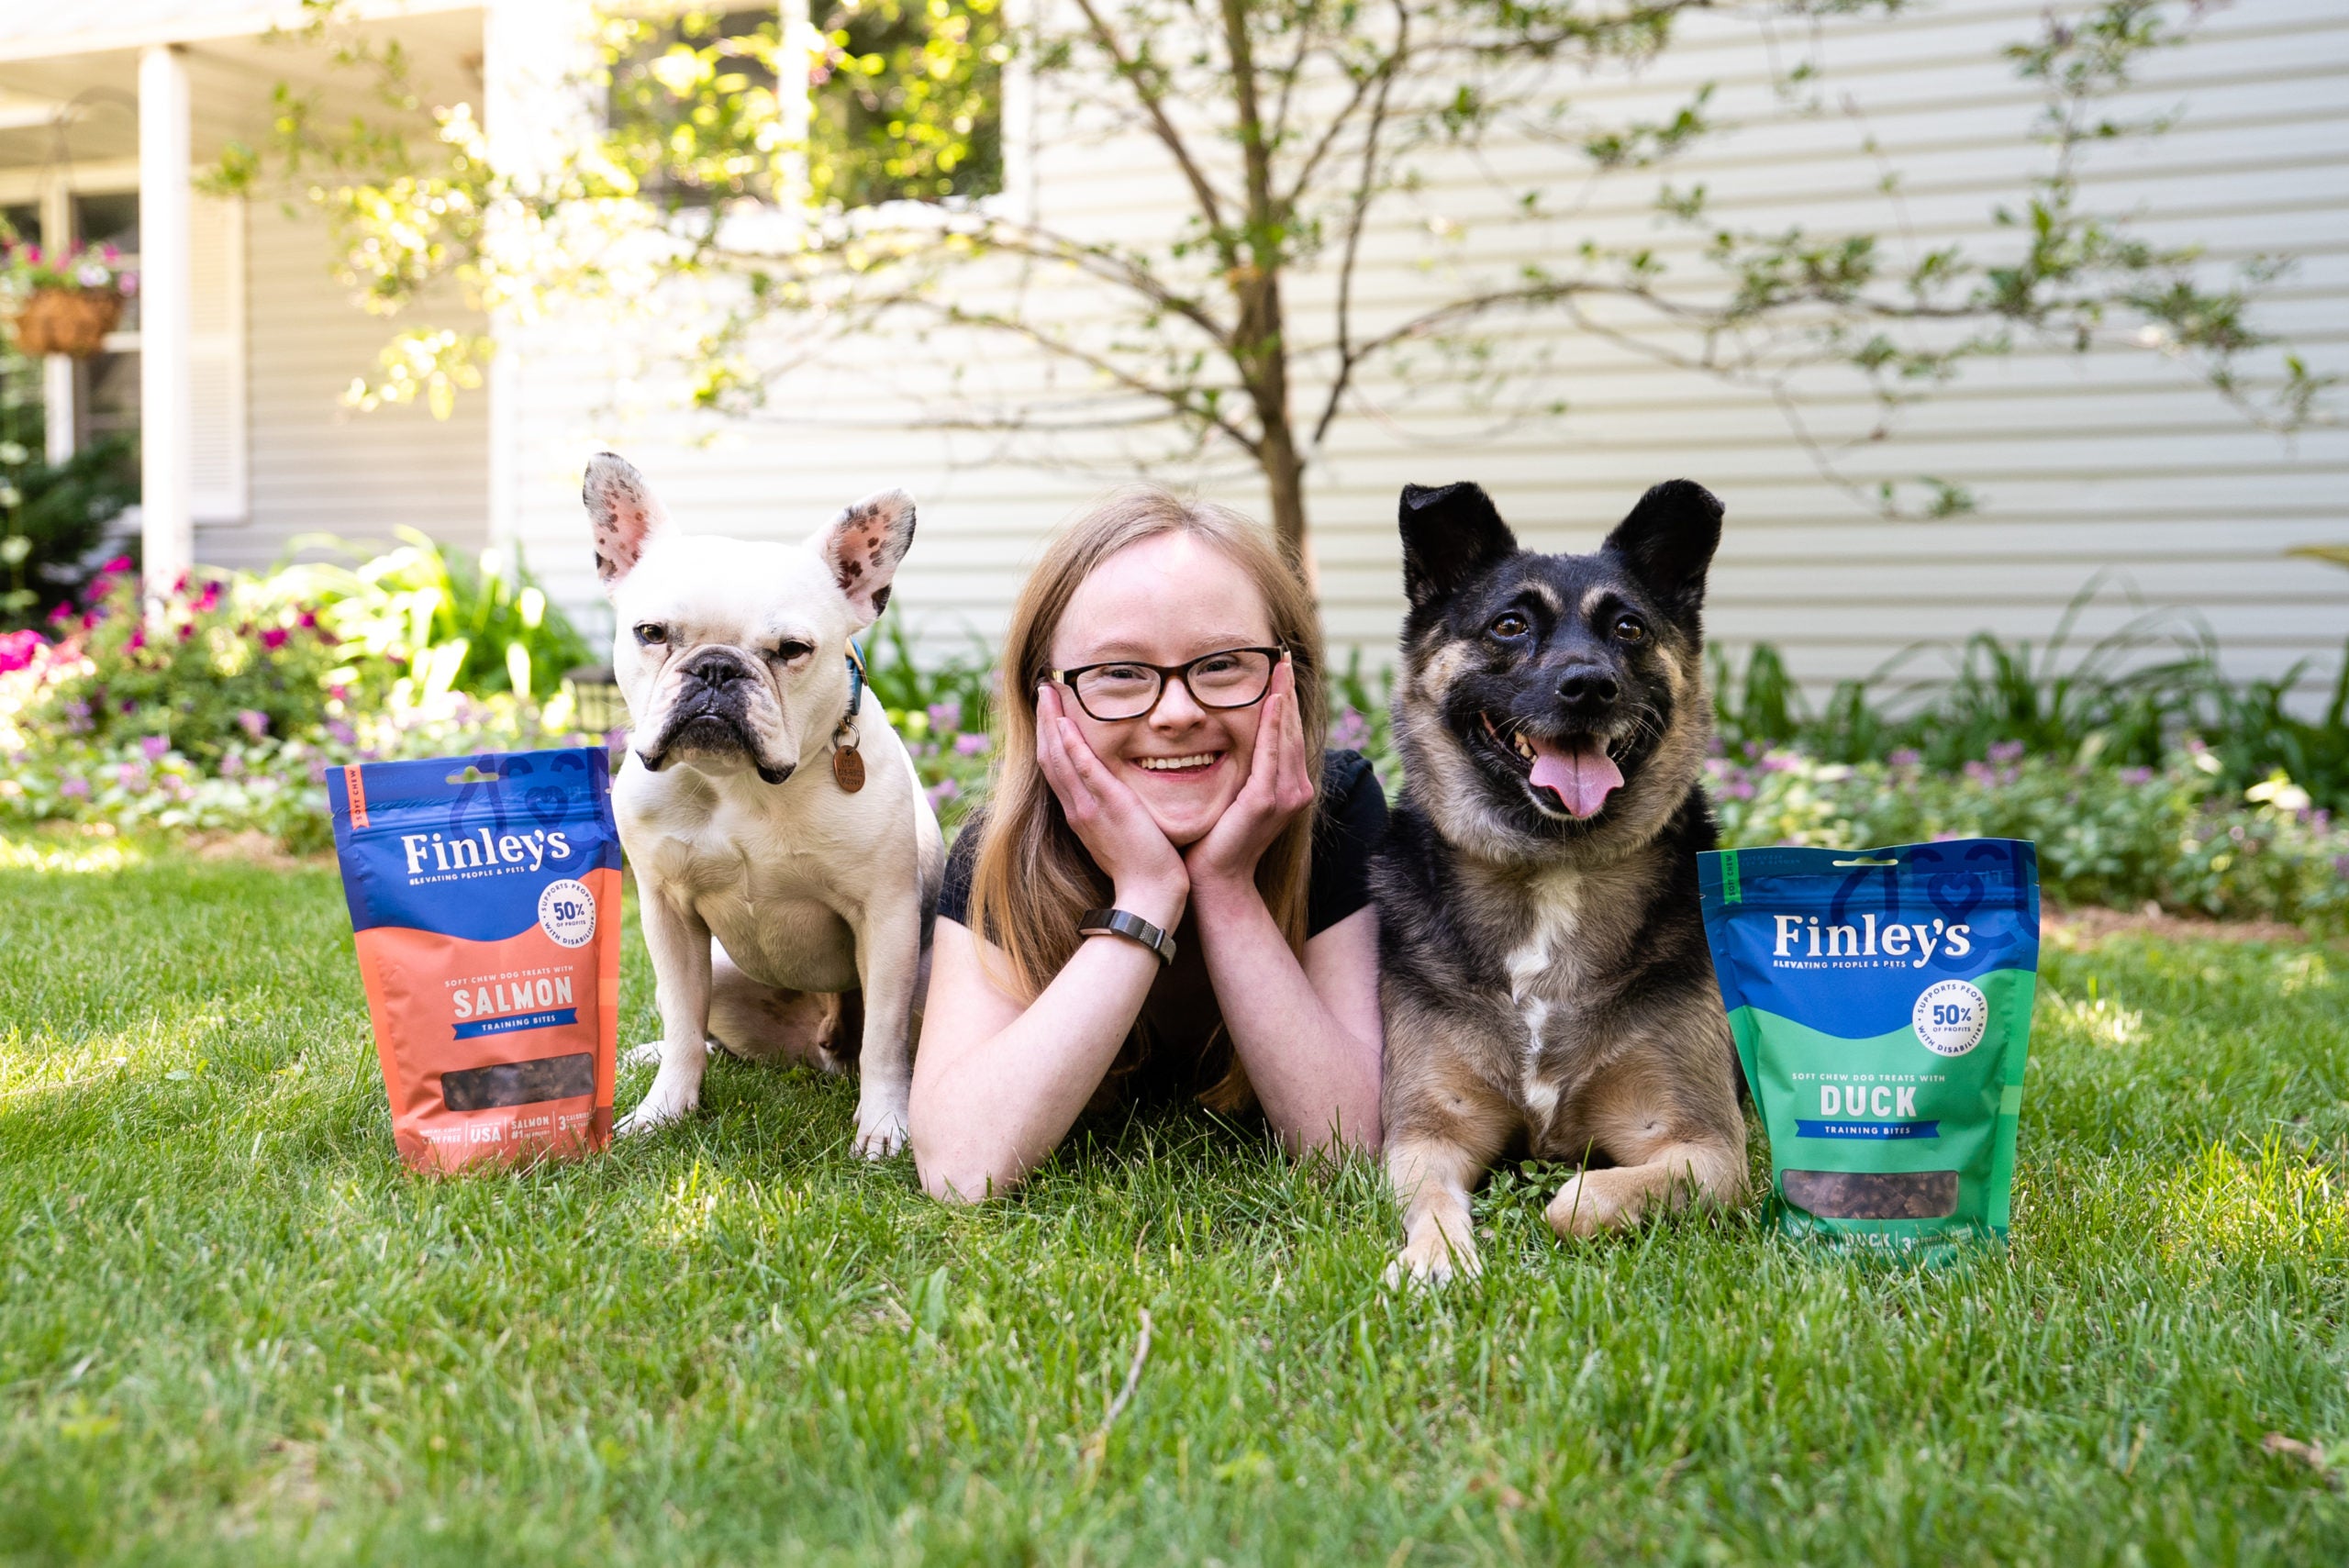 Finley's dog treats elevating people and pets. Shop now and support a good cause.